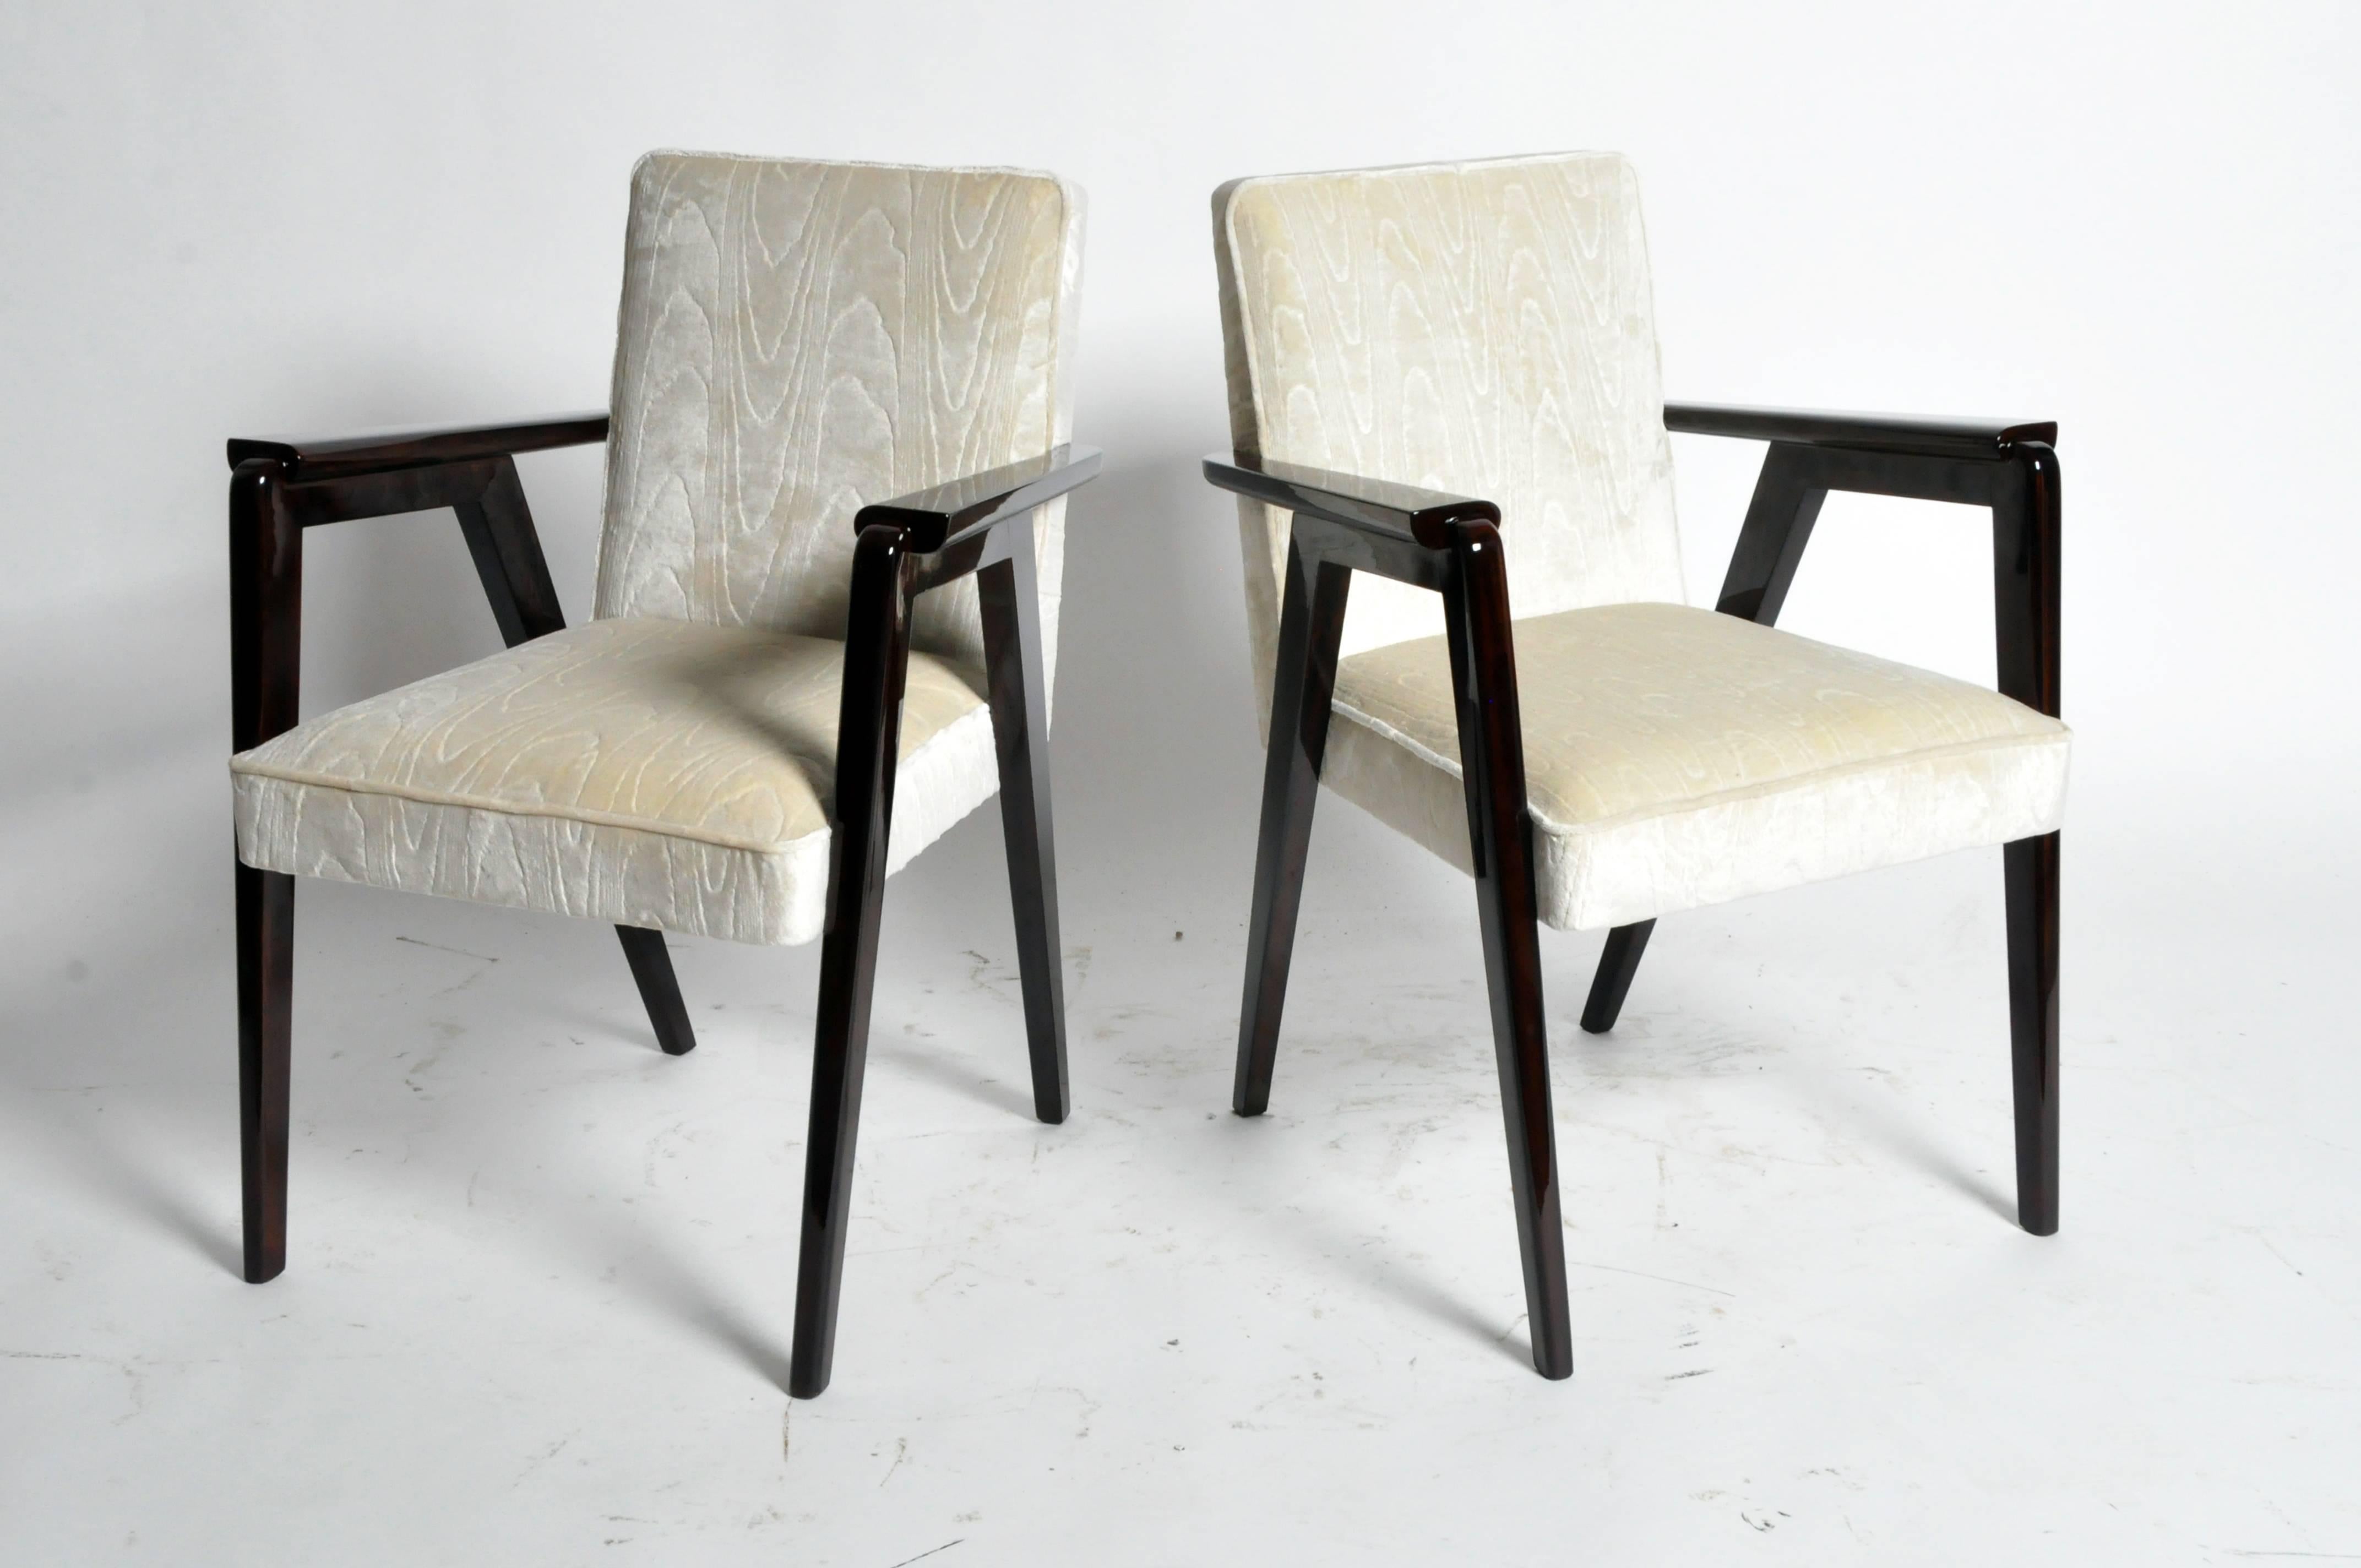 Pair of Vintage French bridge chairs. Beautiful, modernist lines and sturdy framework. The wavy, tilde shaped arm rails and gently rounded edges on the legs of these chairs softens the angularity of their frames.